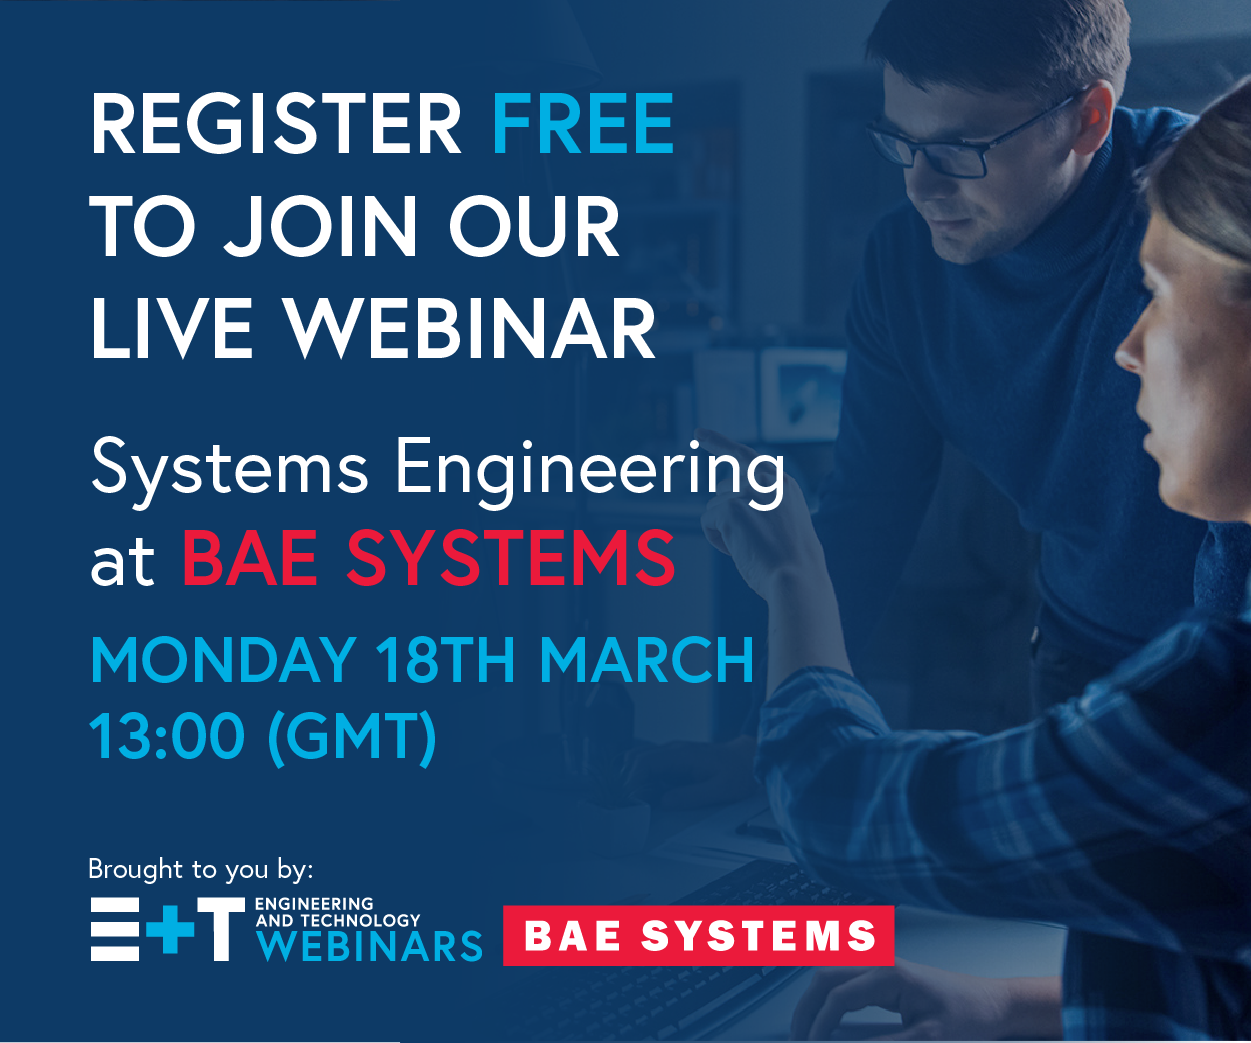 Systems Engineering at BAE Systems